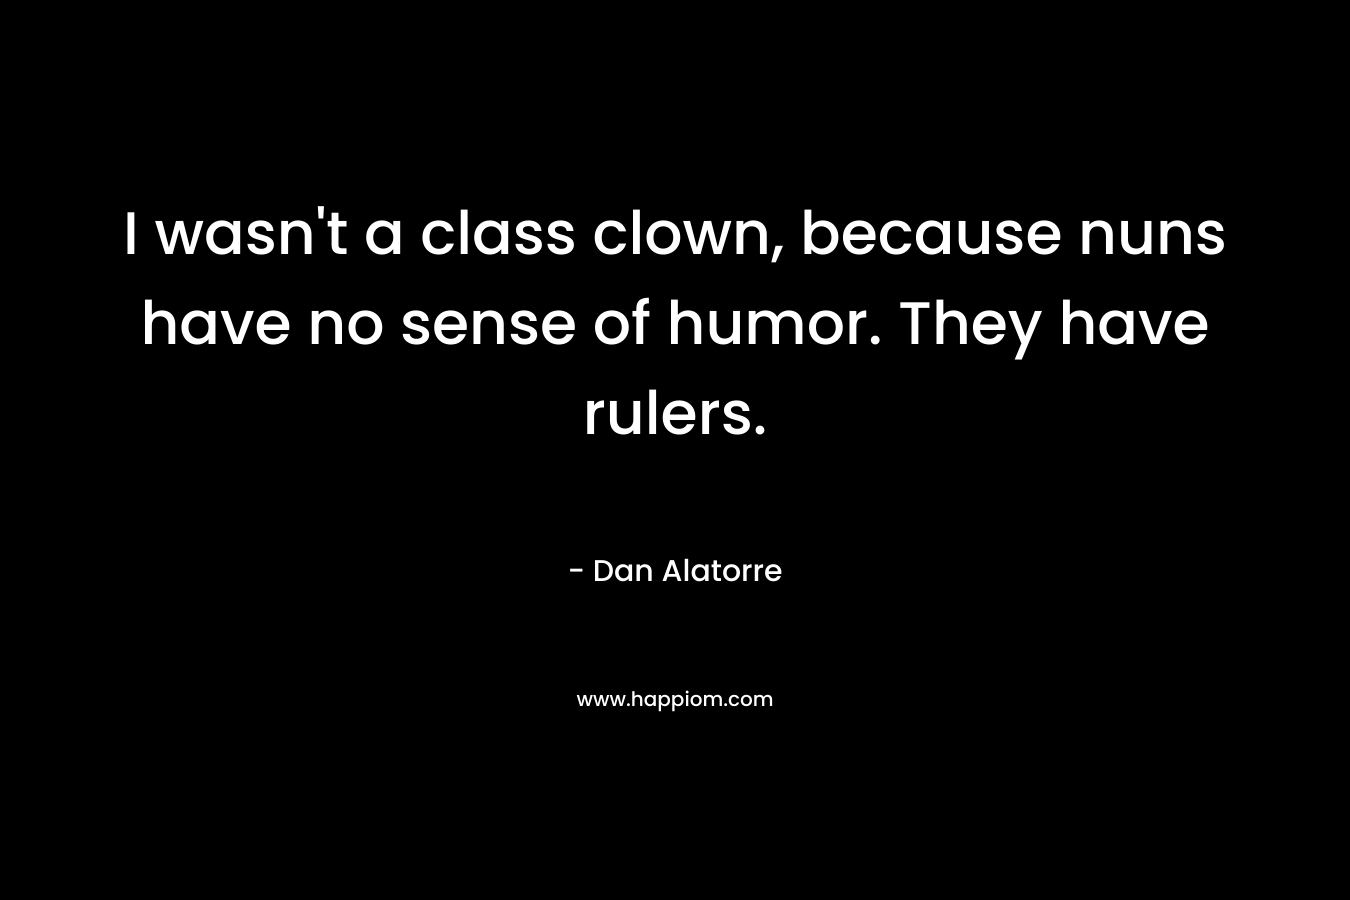 I wasn’t a class clown, because nuns have no sense of humor. They have rulers. – Dan Alatorre